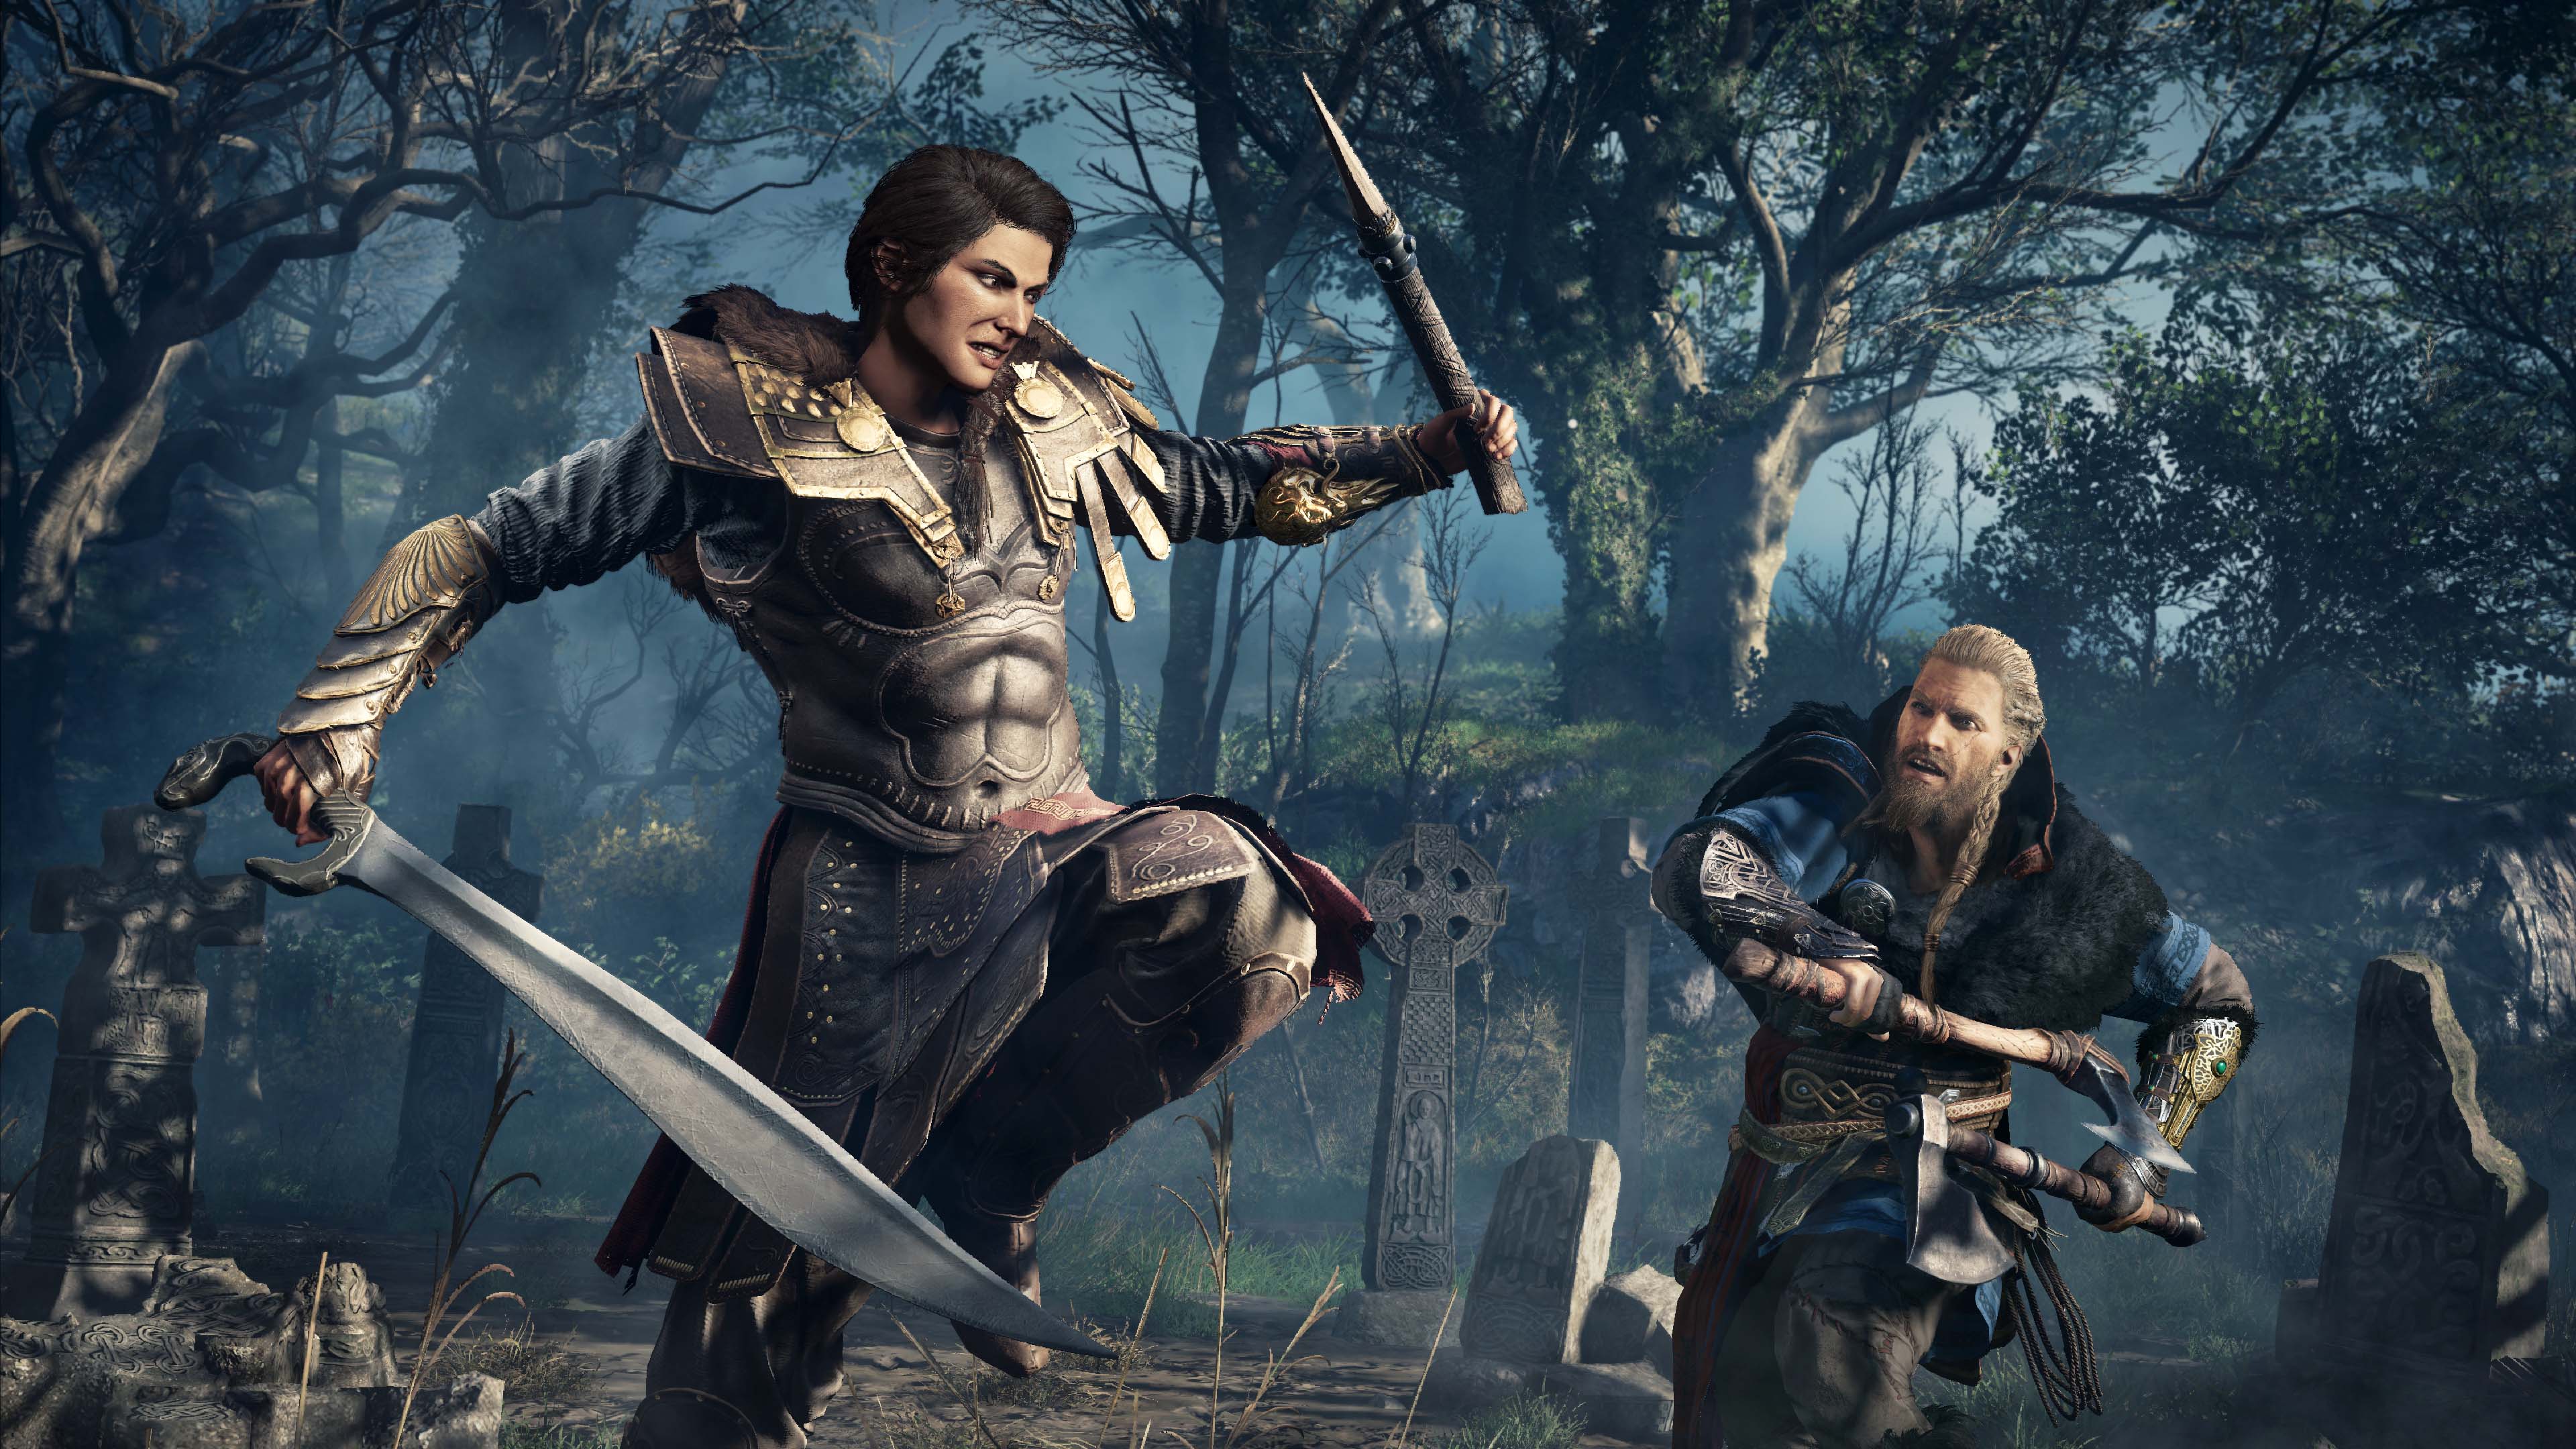 Eivor fights alongside another viking in Assassin's Creed Valhalla